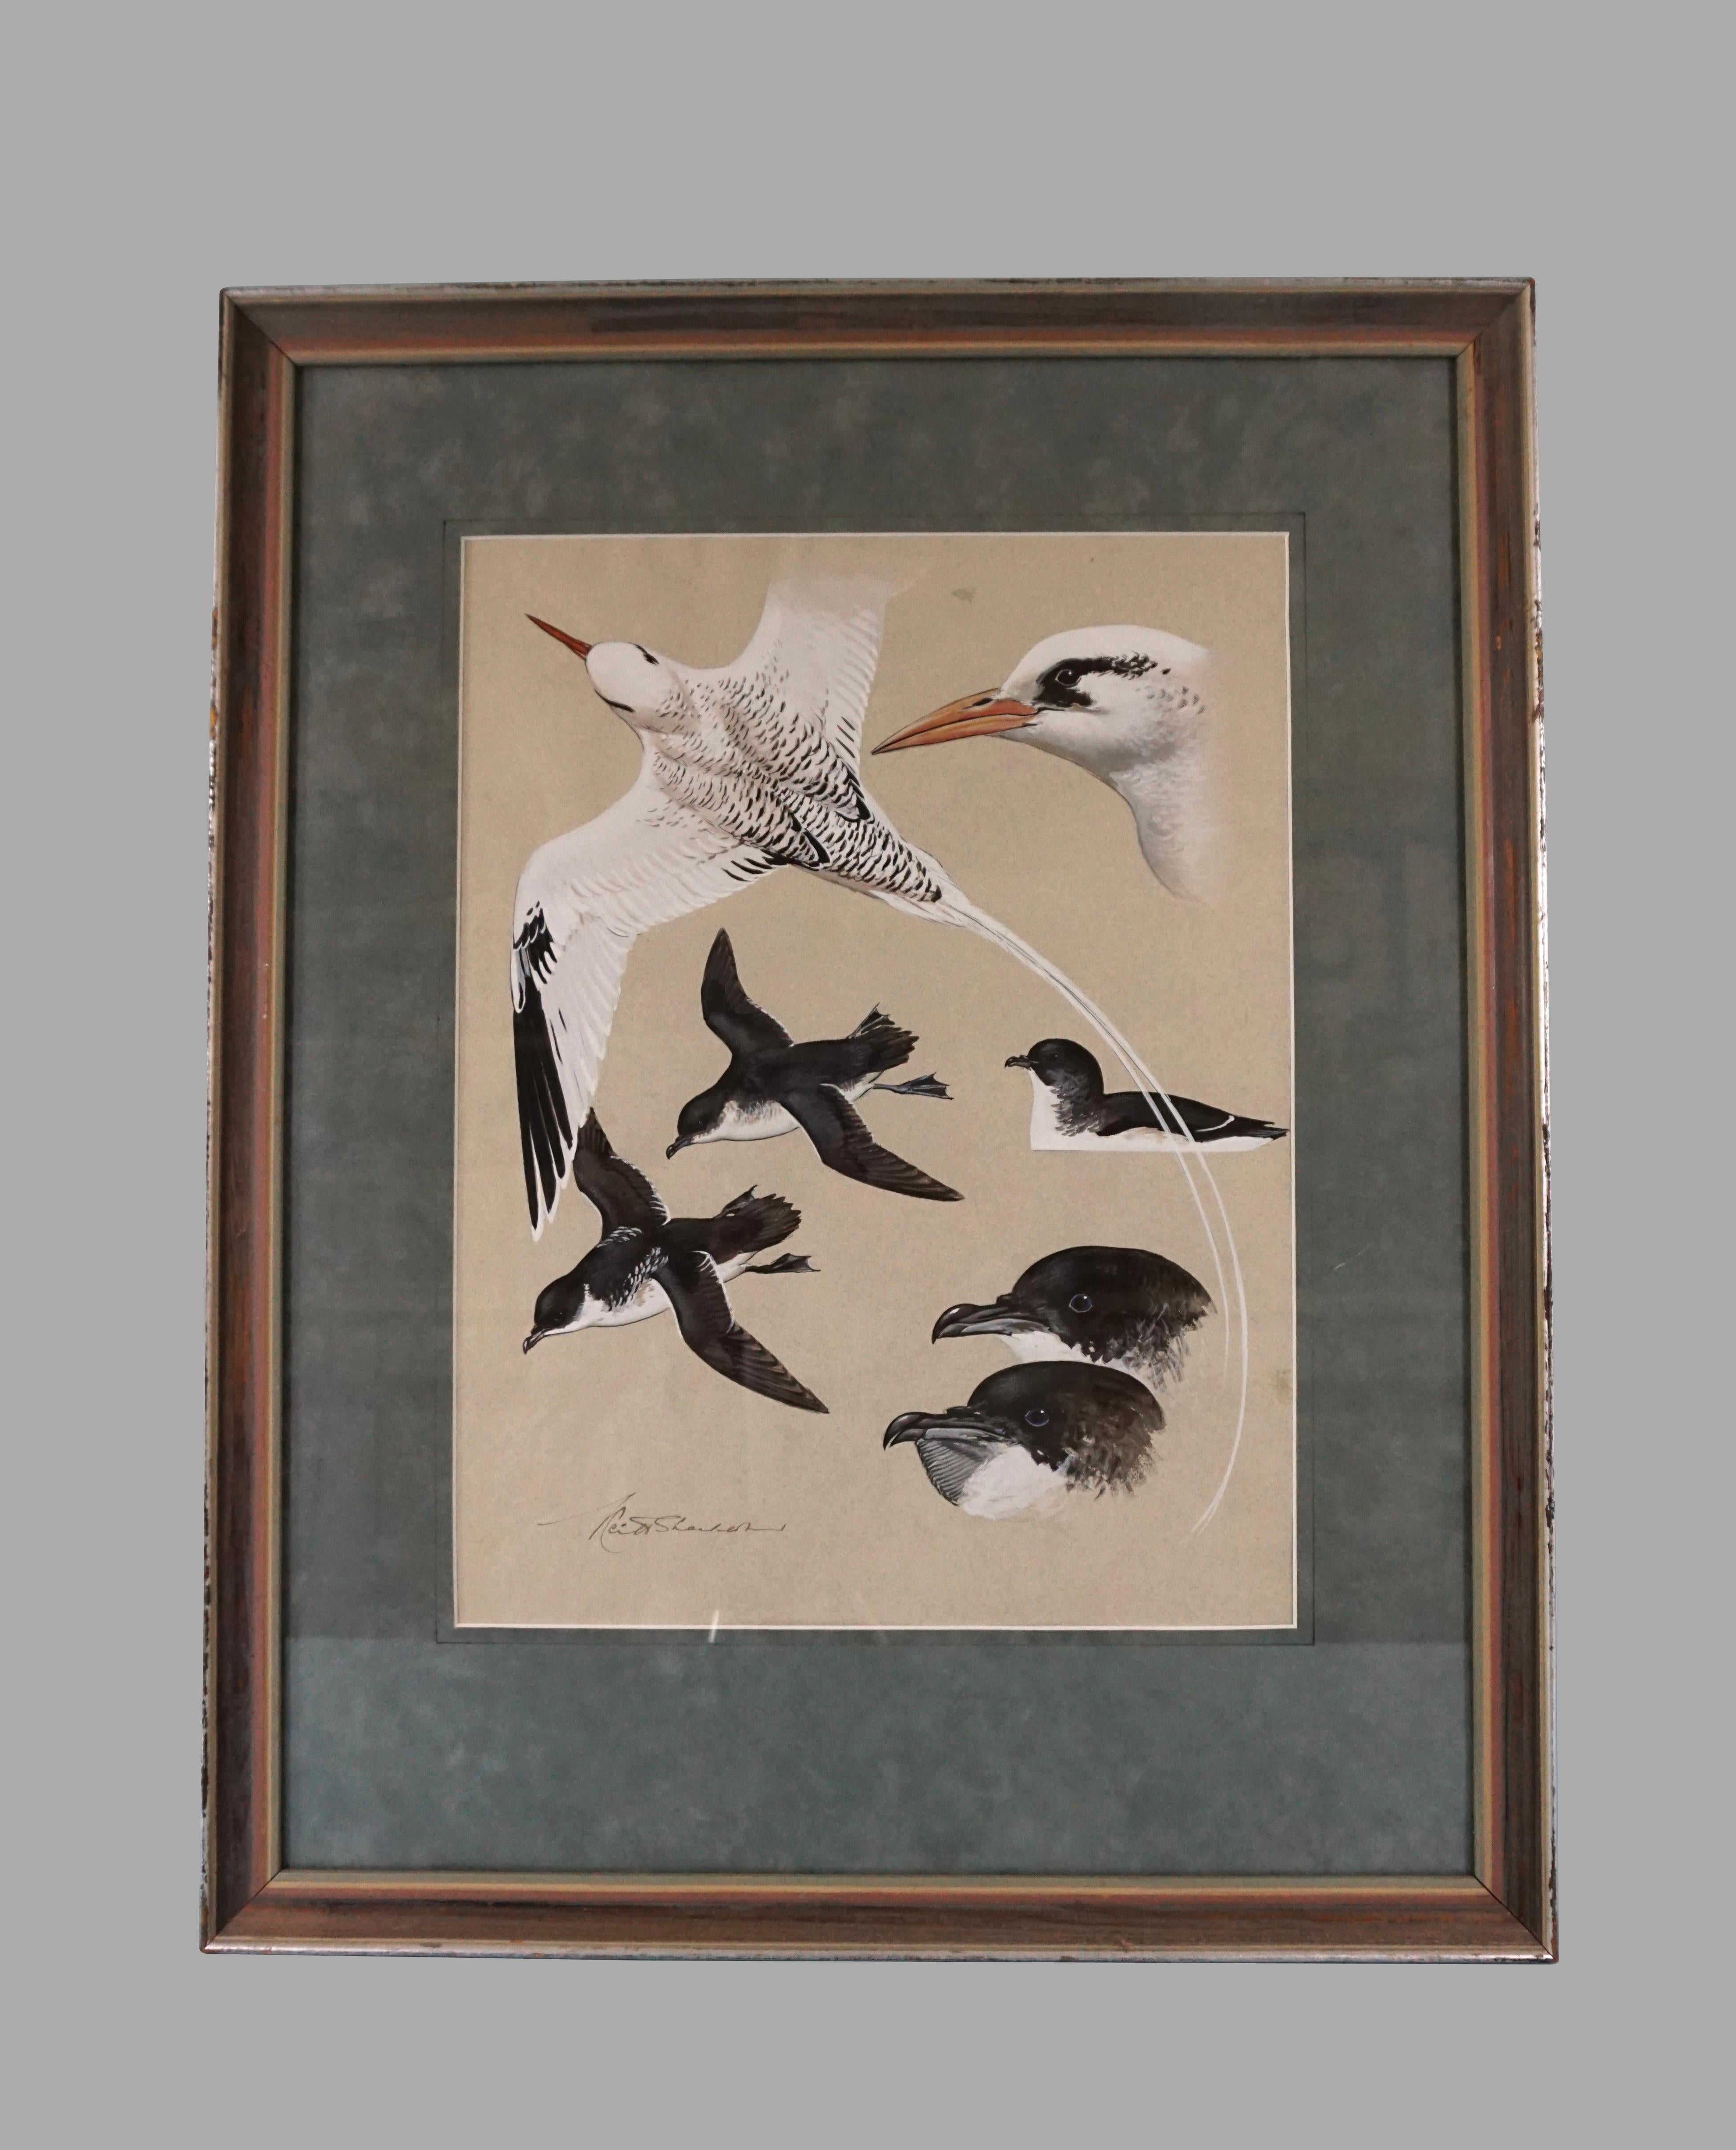 A dramatic gouache on paper of tropical birds and petrels by Keith Shackleton (English 1925 -2015), a well-known British naturalist and artist. Signed lower left. Shackleton was appointed Member of the Order of the British Empire in 2012 for his